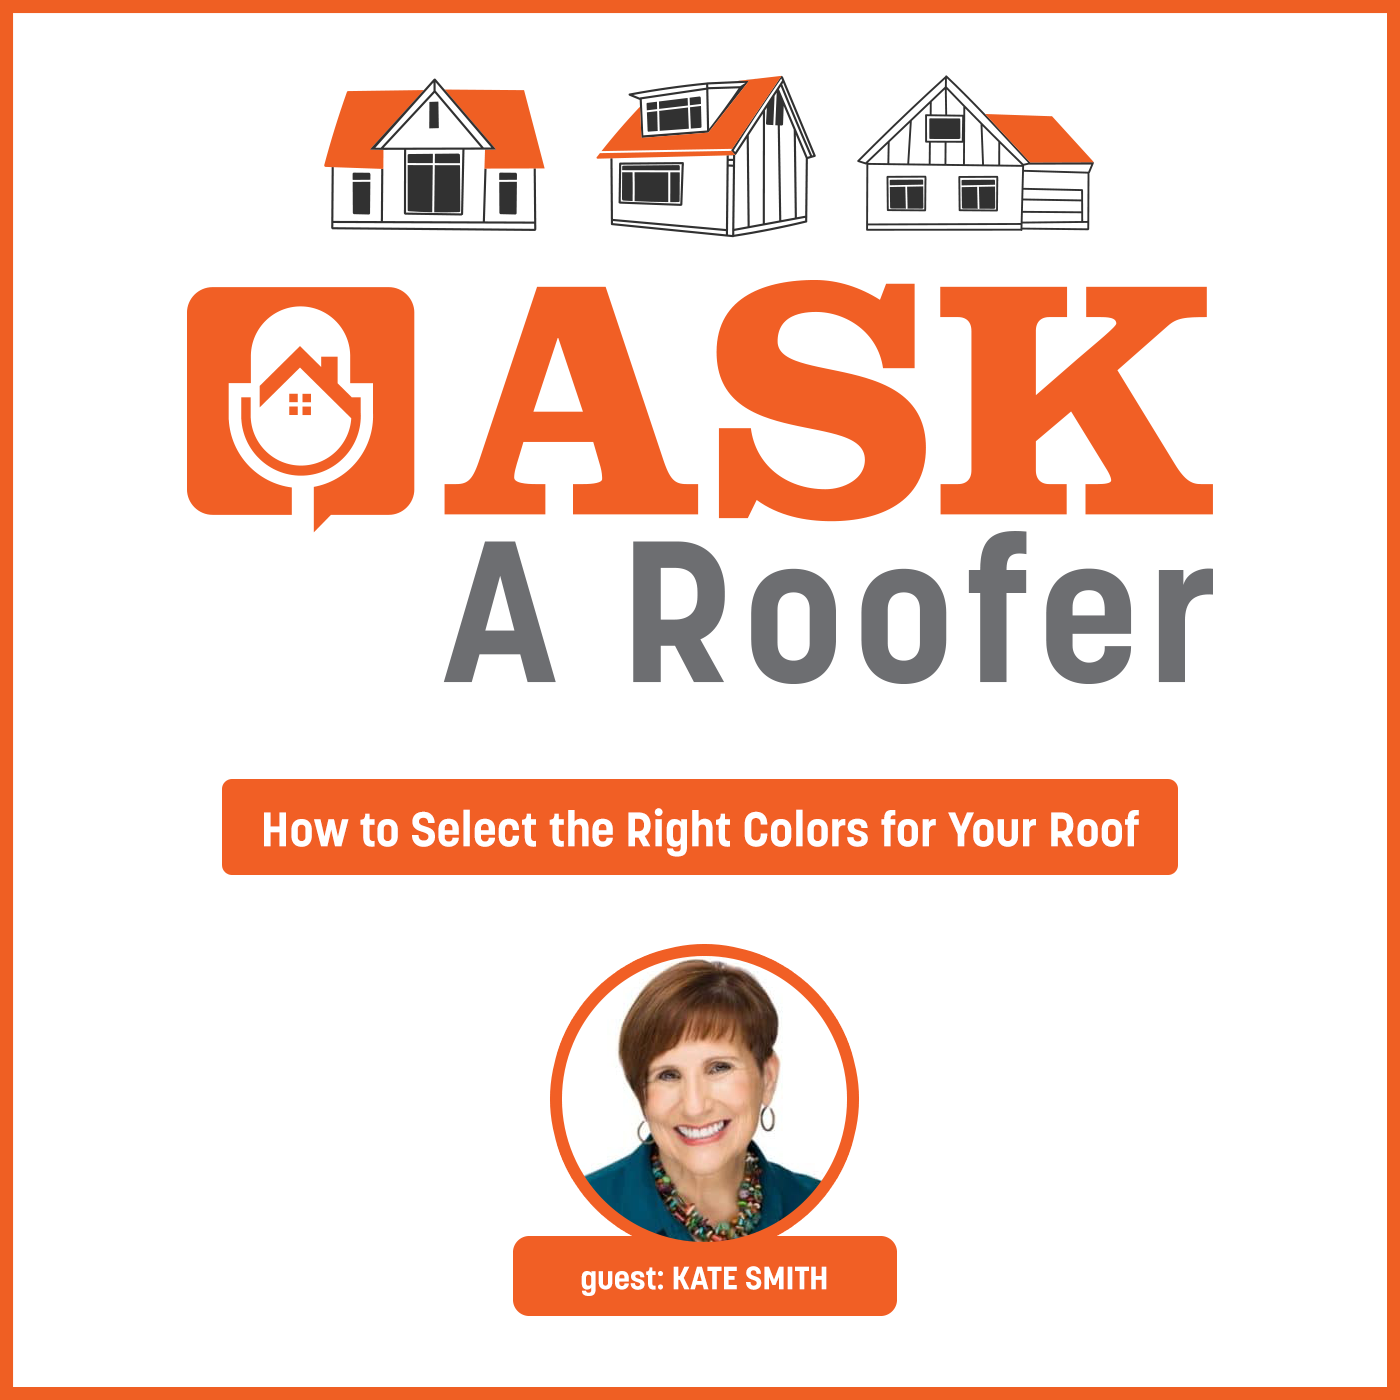 DaVinci Roofscapes - How to Select the Right Colors for Your Roof